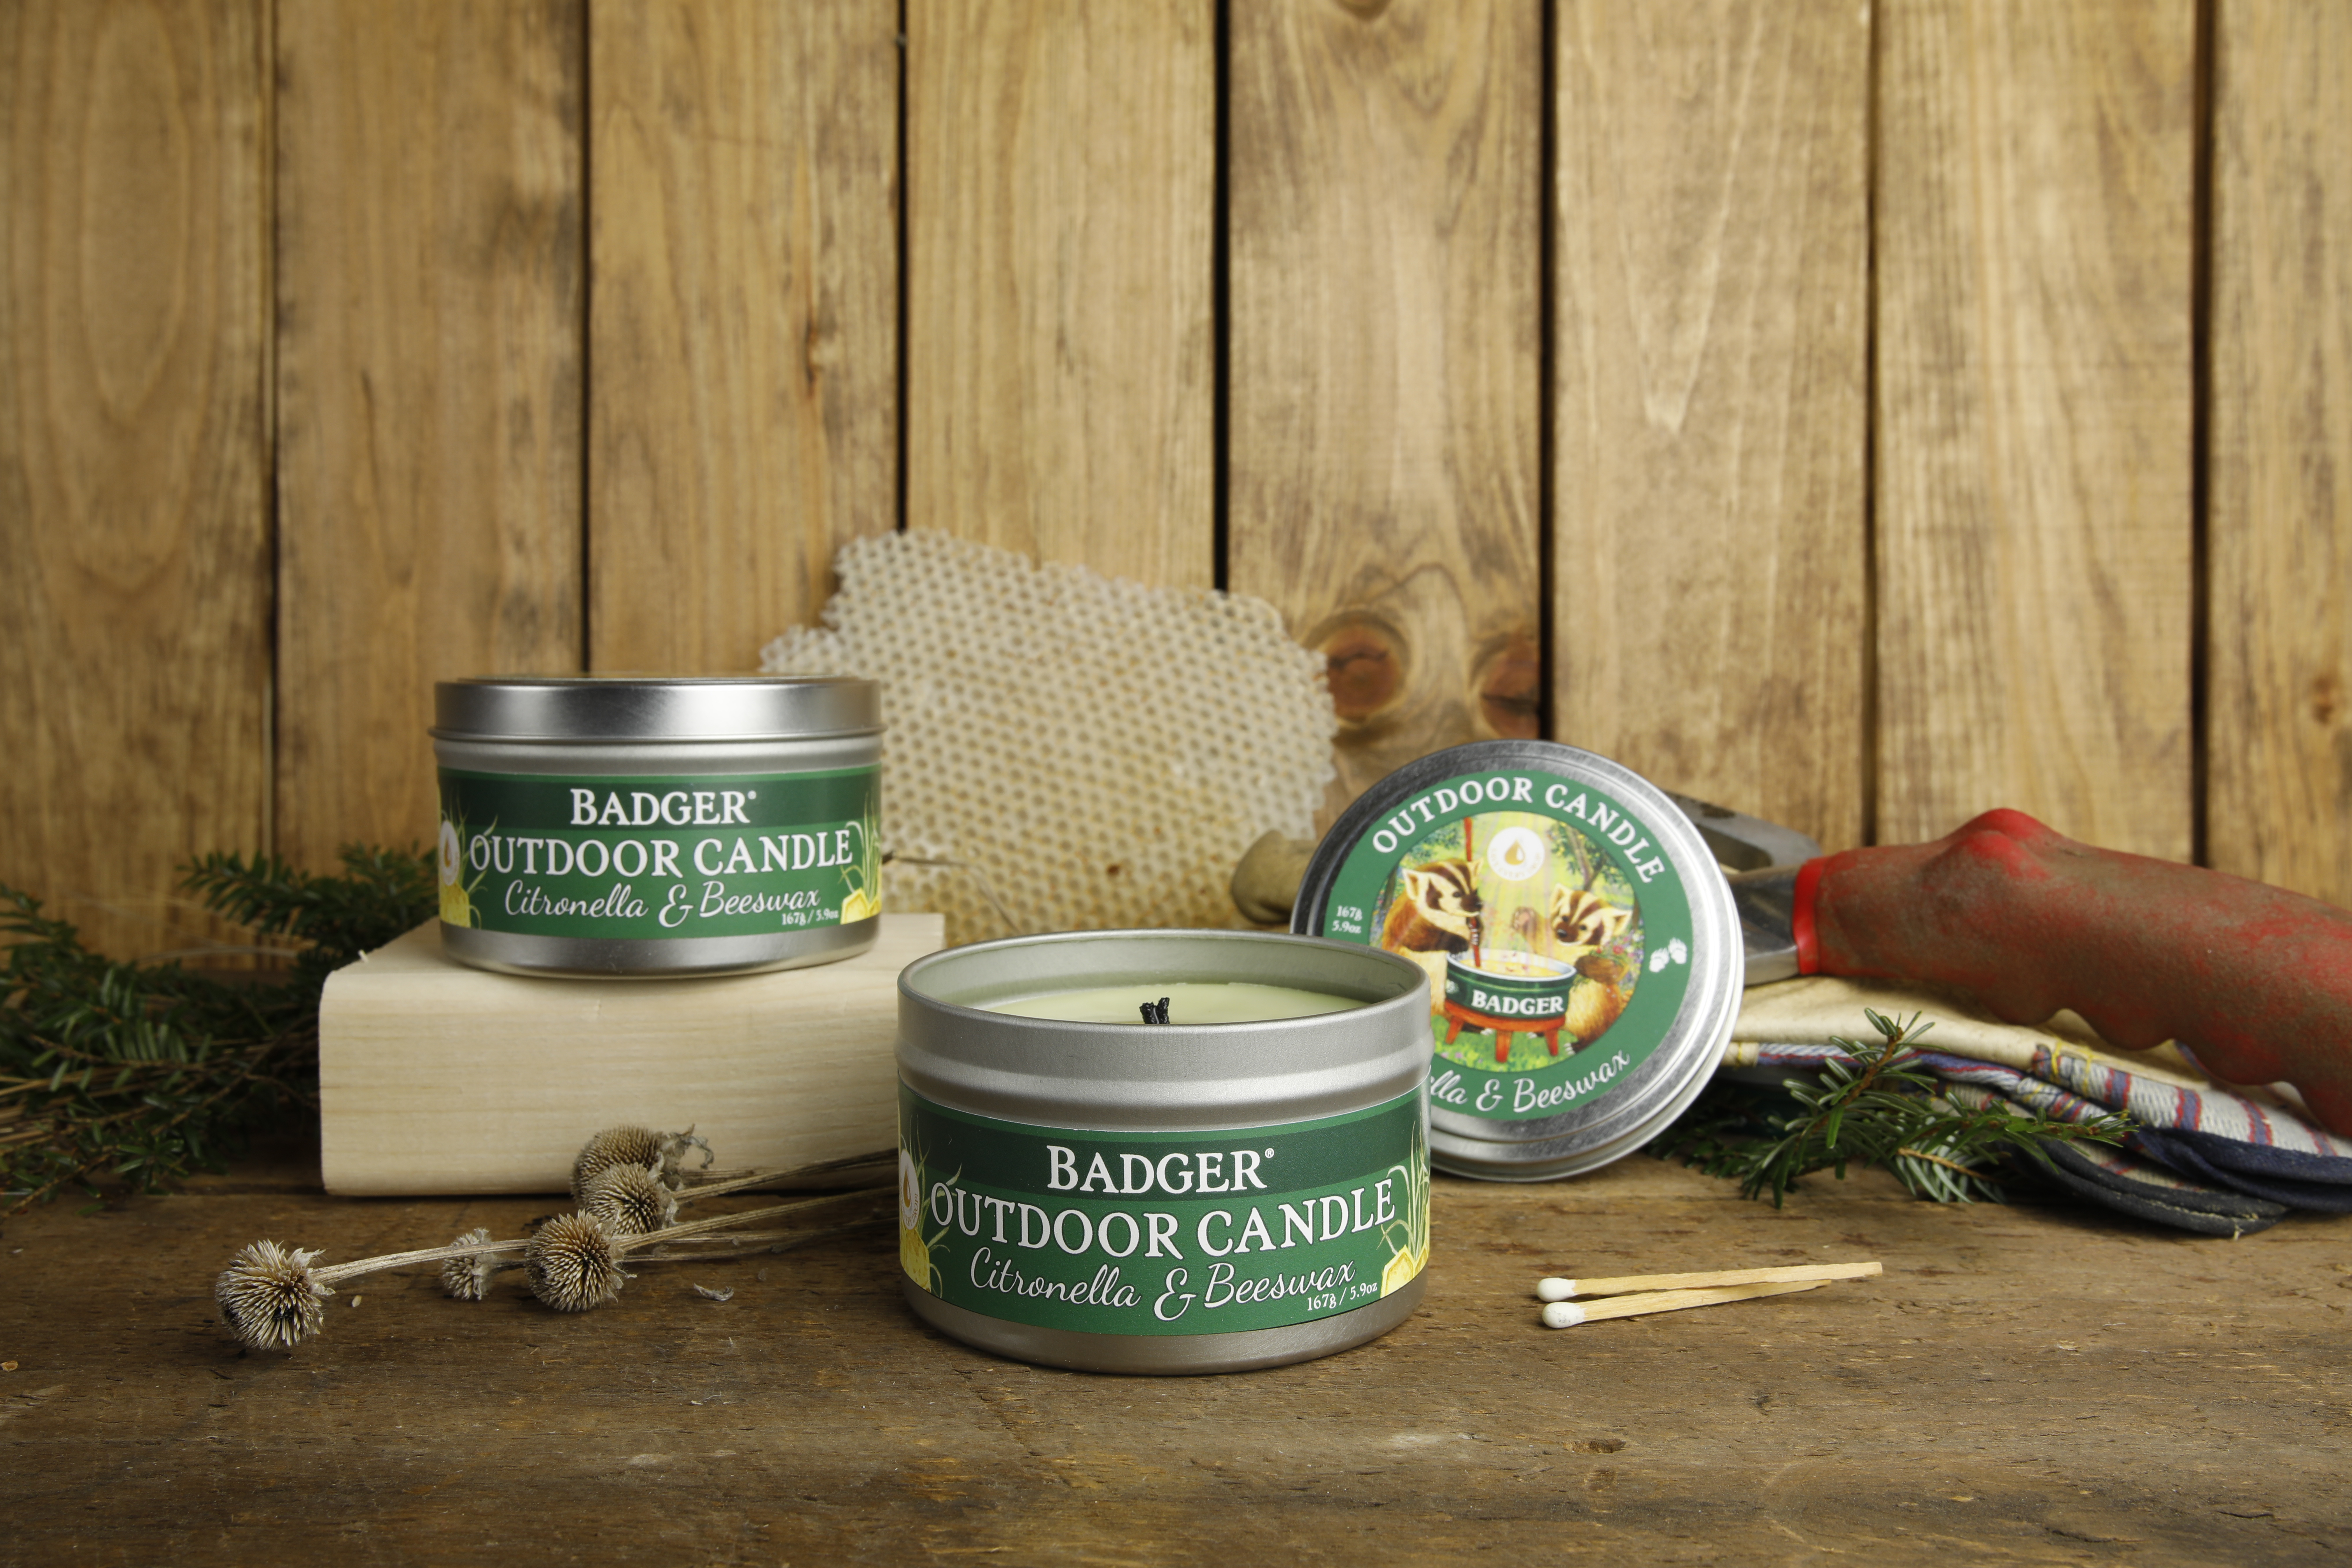 Food-grade organic oils and waxes used to flush production lines at Badger manufacturing facility find new life as clean-burning, all natural outdoor citronella candles in reusable tins.